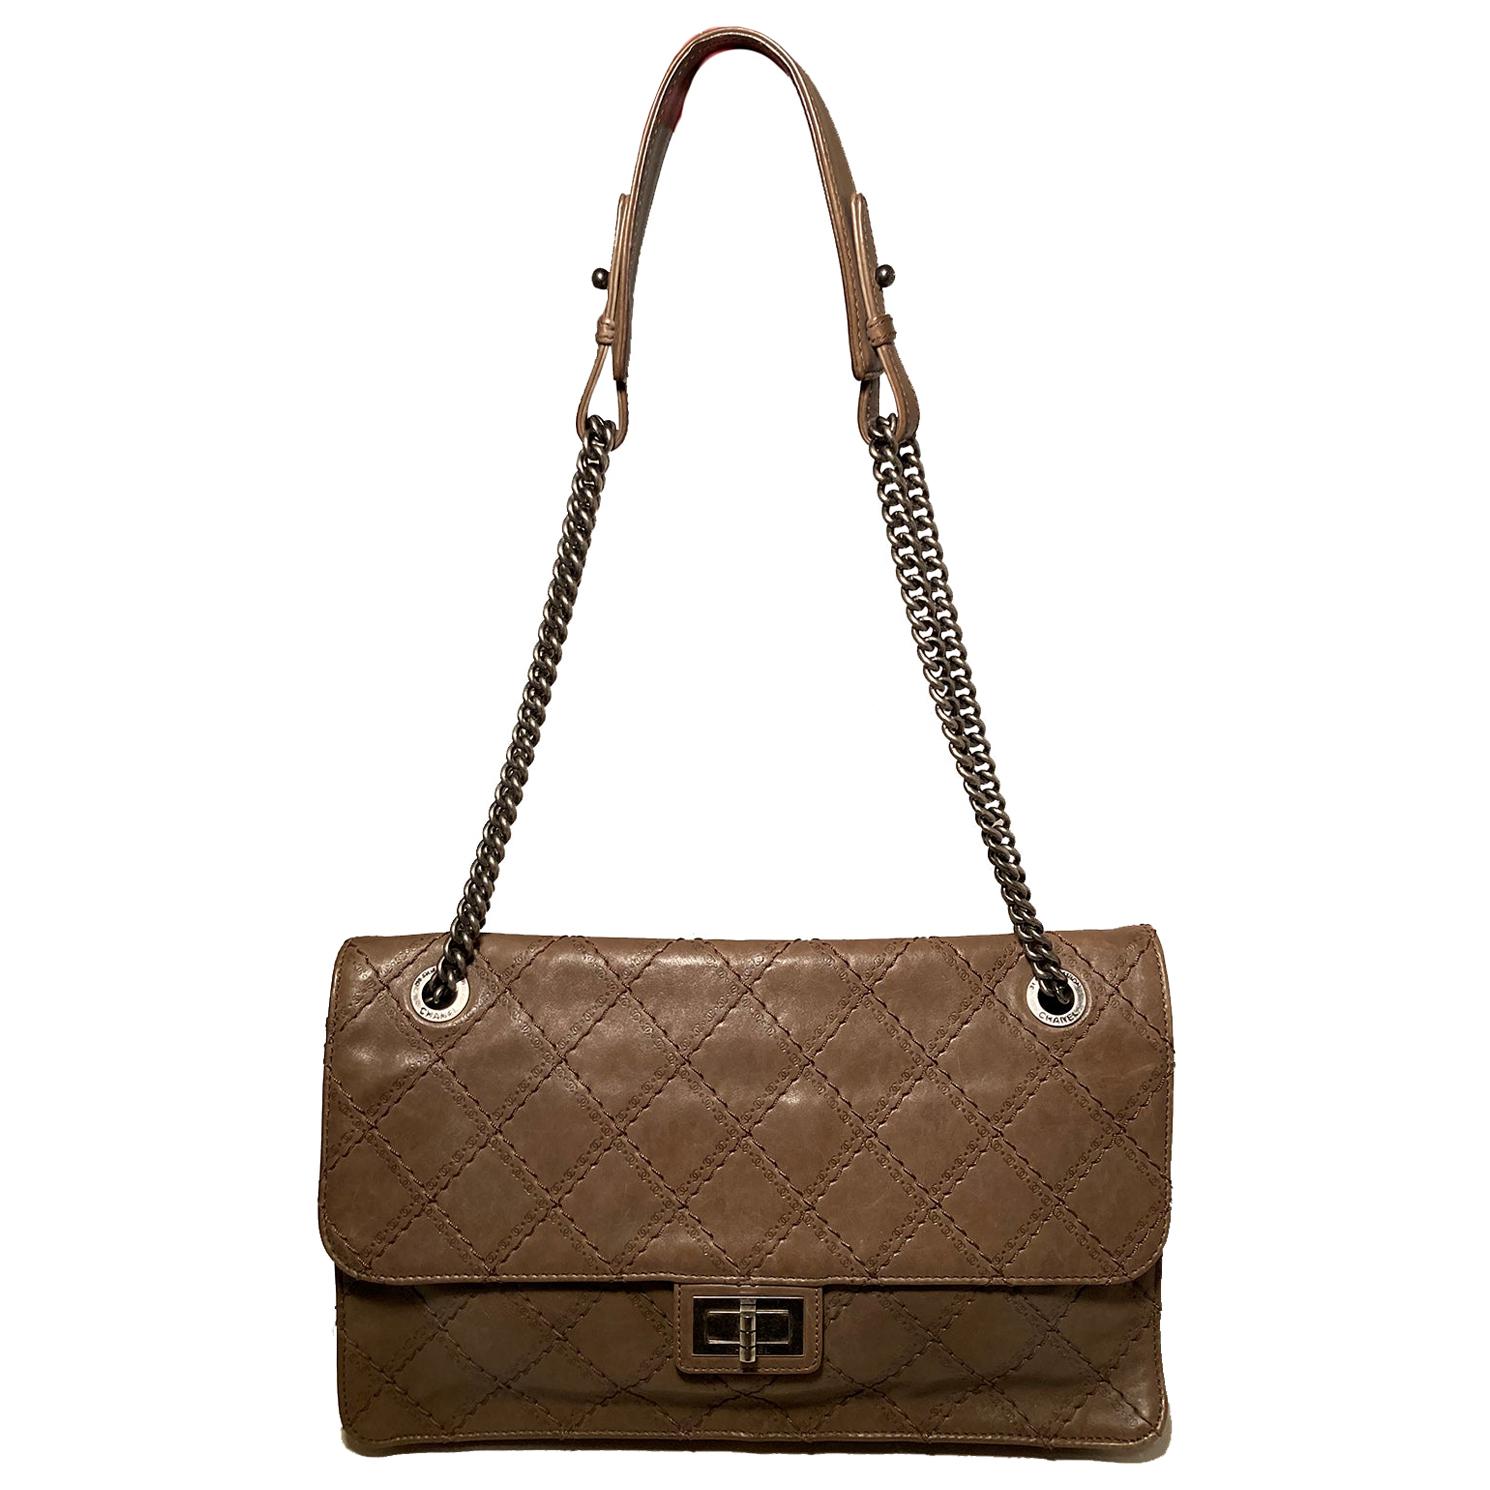 Chanel Brown Embossed Quilted Leather Classic Flap in excellent condition. Brown quilted leather exterior with embossed CC logo along quilting. Ruthenium hardware and double chain shoulder strap with leather center. Mademoiselle twist closure opens